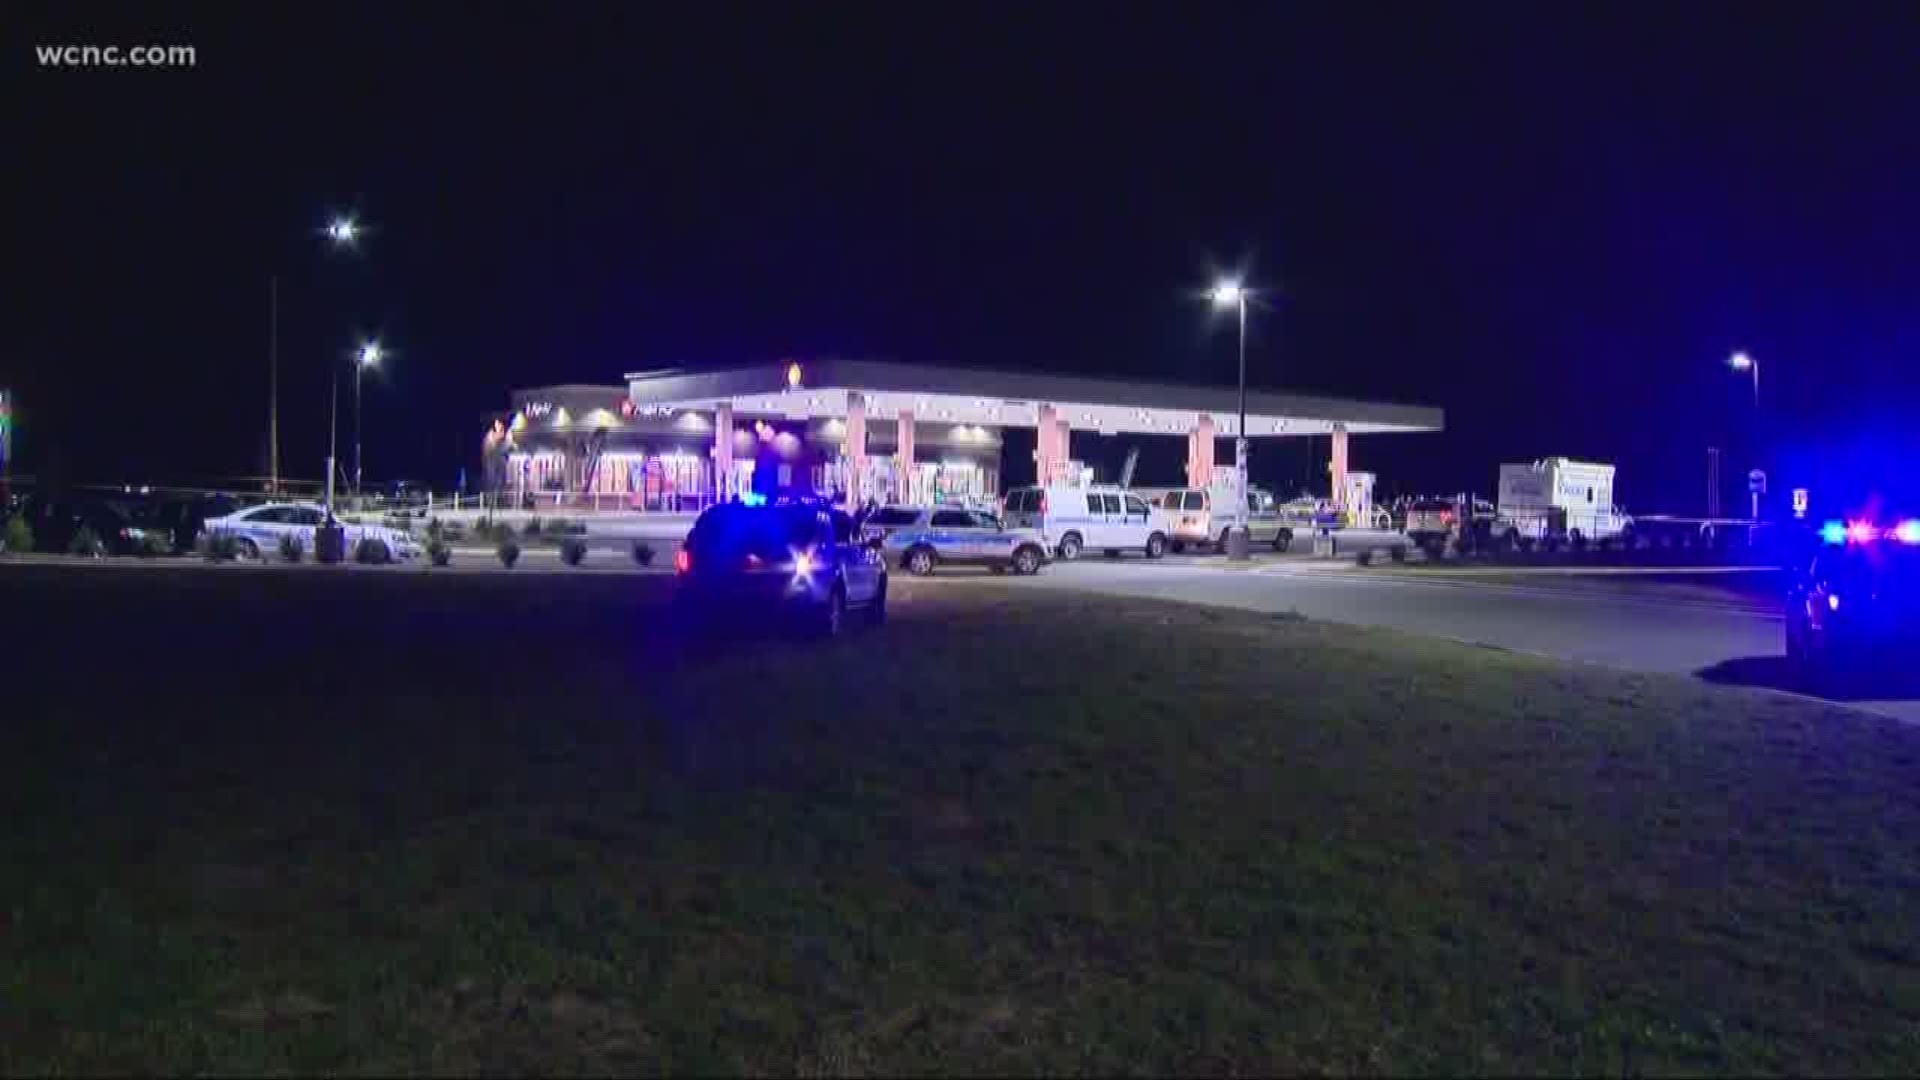 Police say the shooting happened on Mallard Creek Road. CMPD responded to a gas station near Concord Mills Mall just after 6:30 p.m.